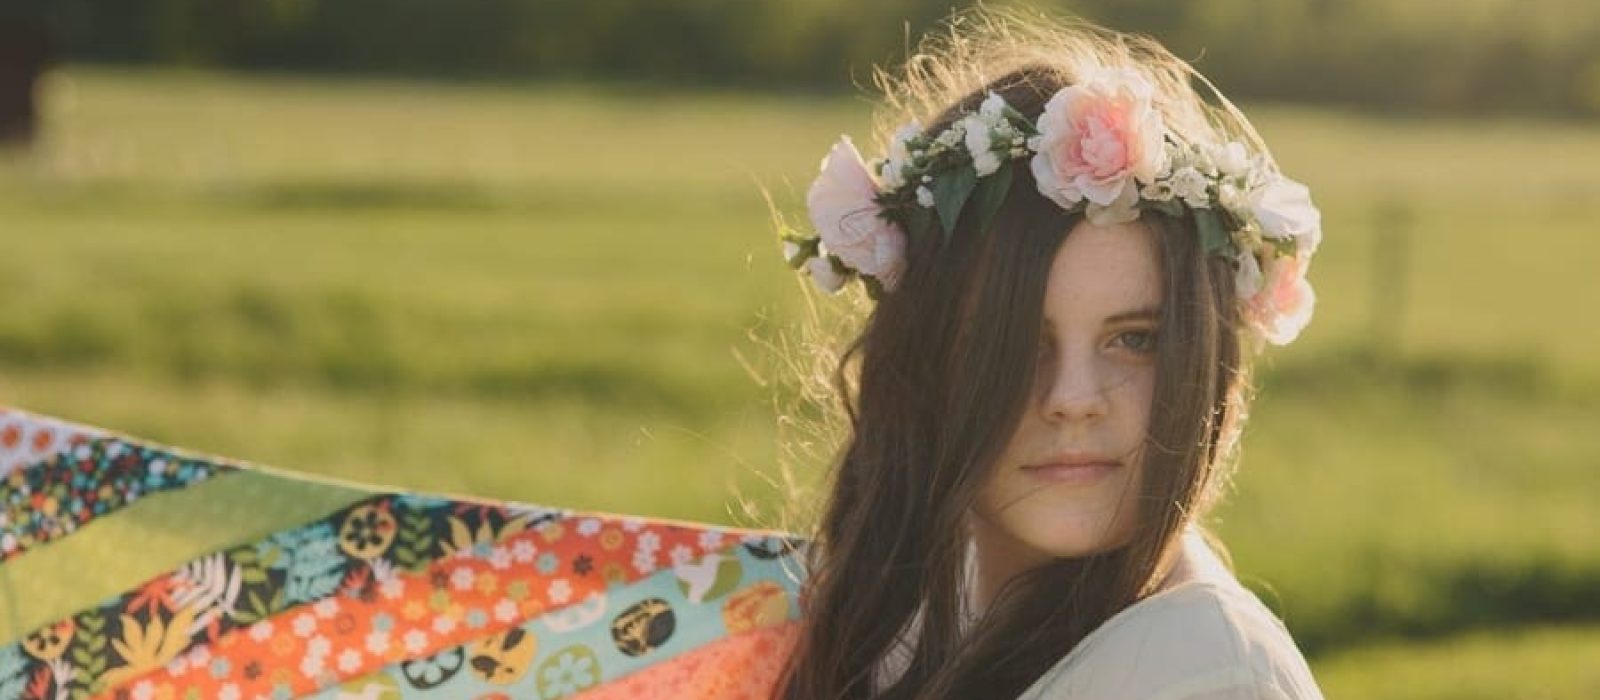 I headshot of a teen holding a fabric kite while standing in a field wearing a flower crown and rim lighting of her hair